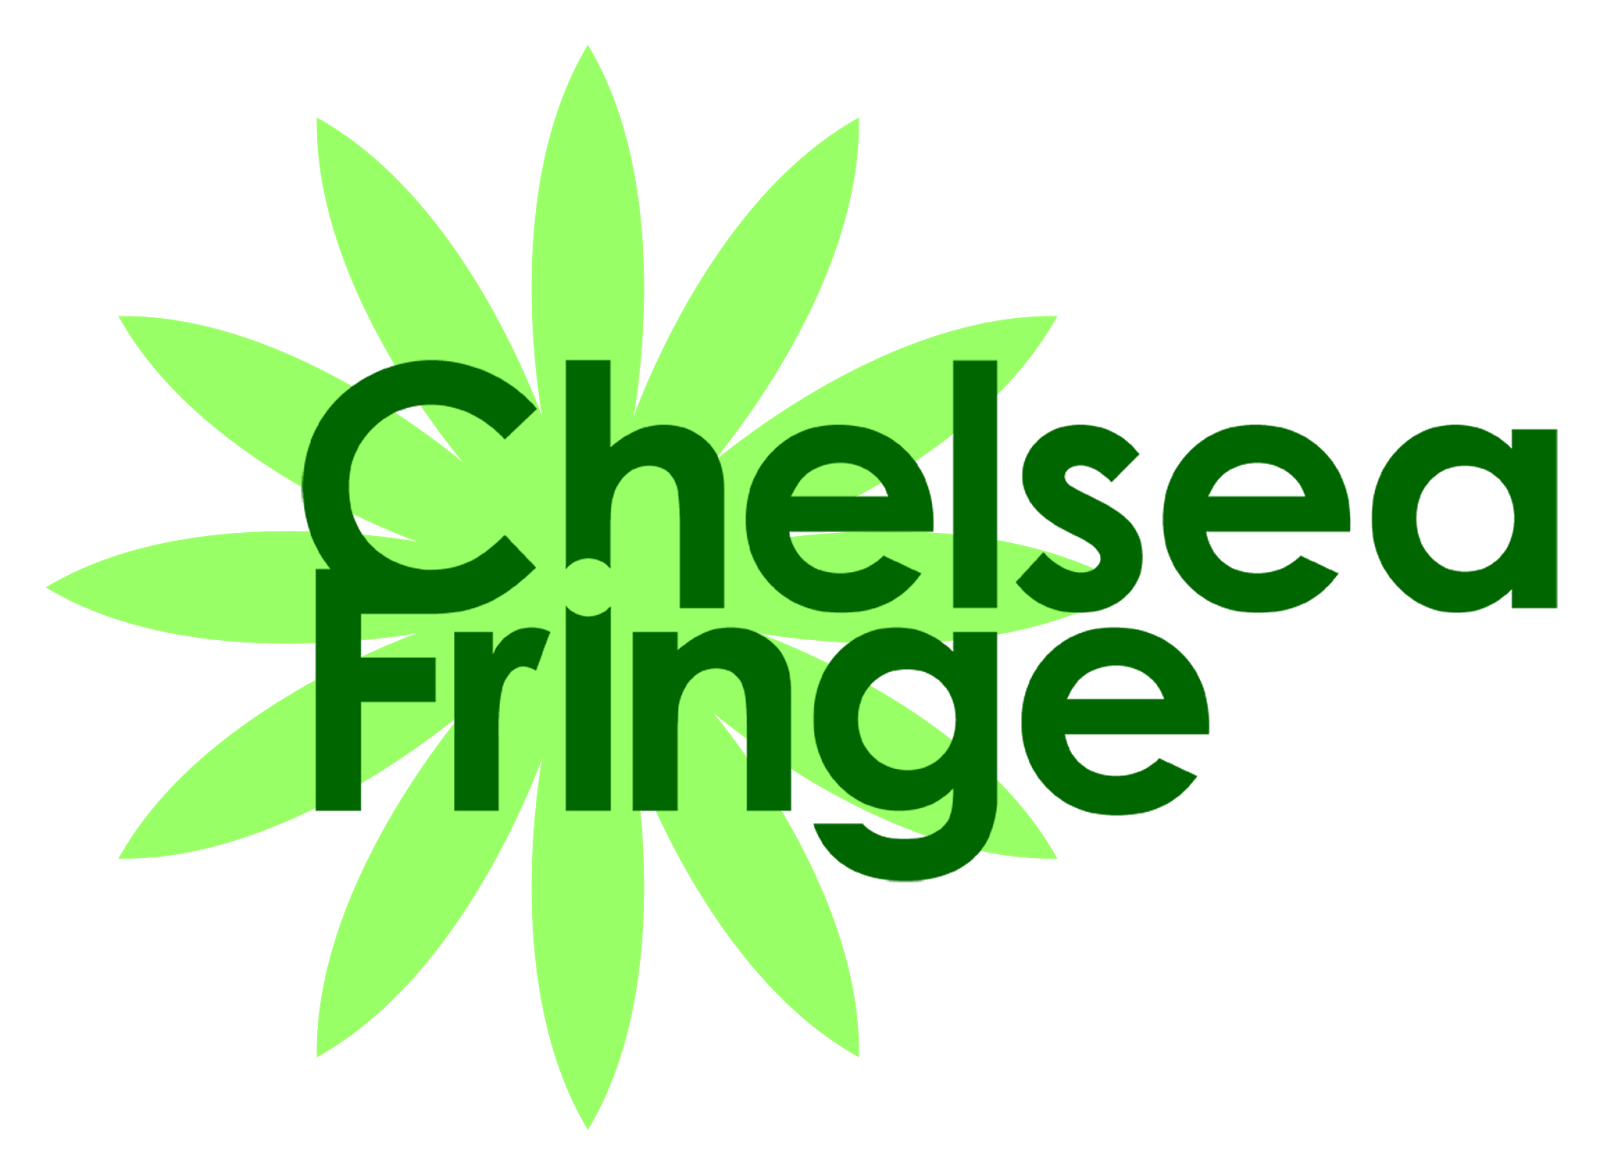 logo chelsea, may chelsea fringe living under one sun community charity and volunteering #28396